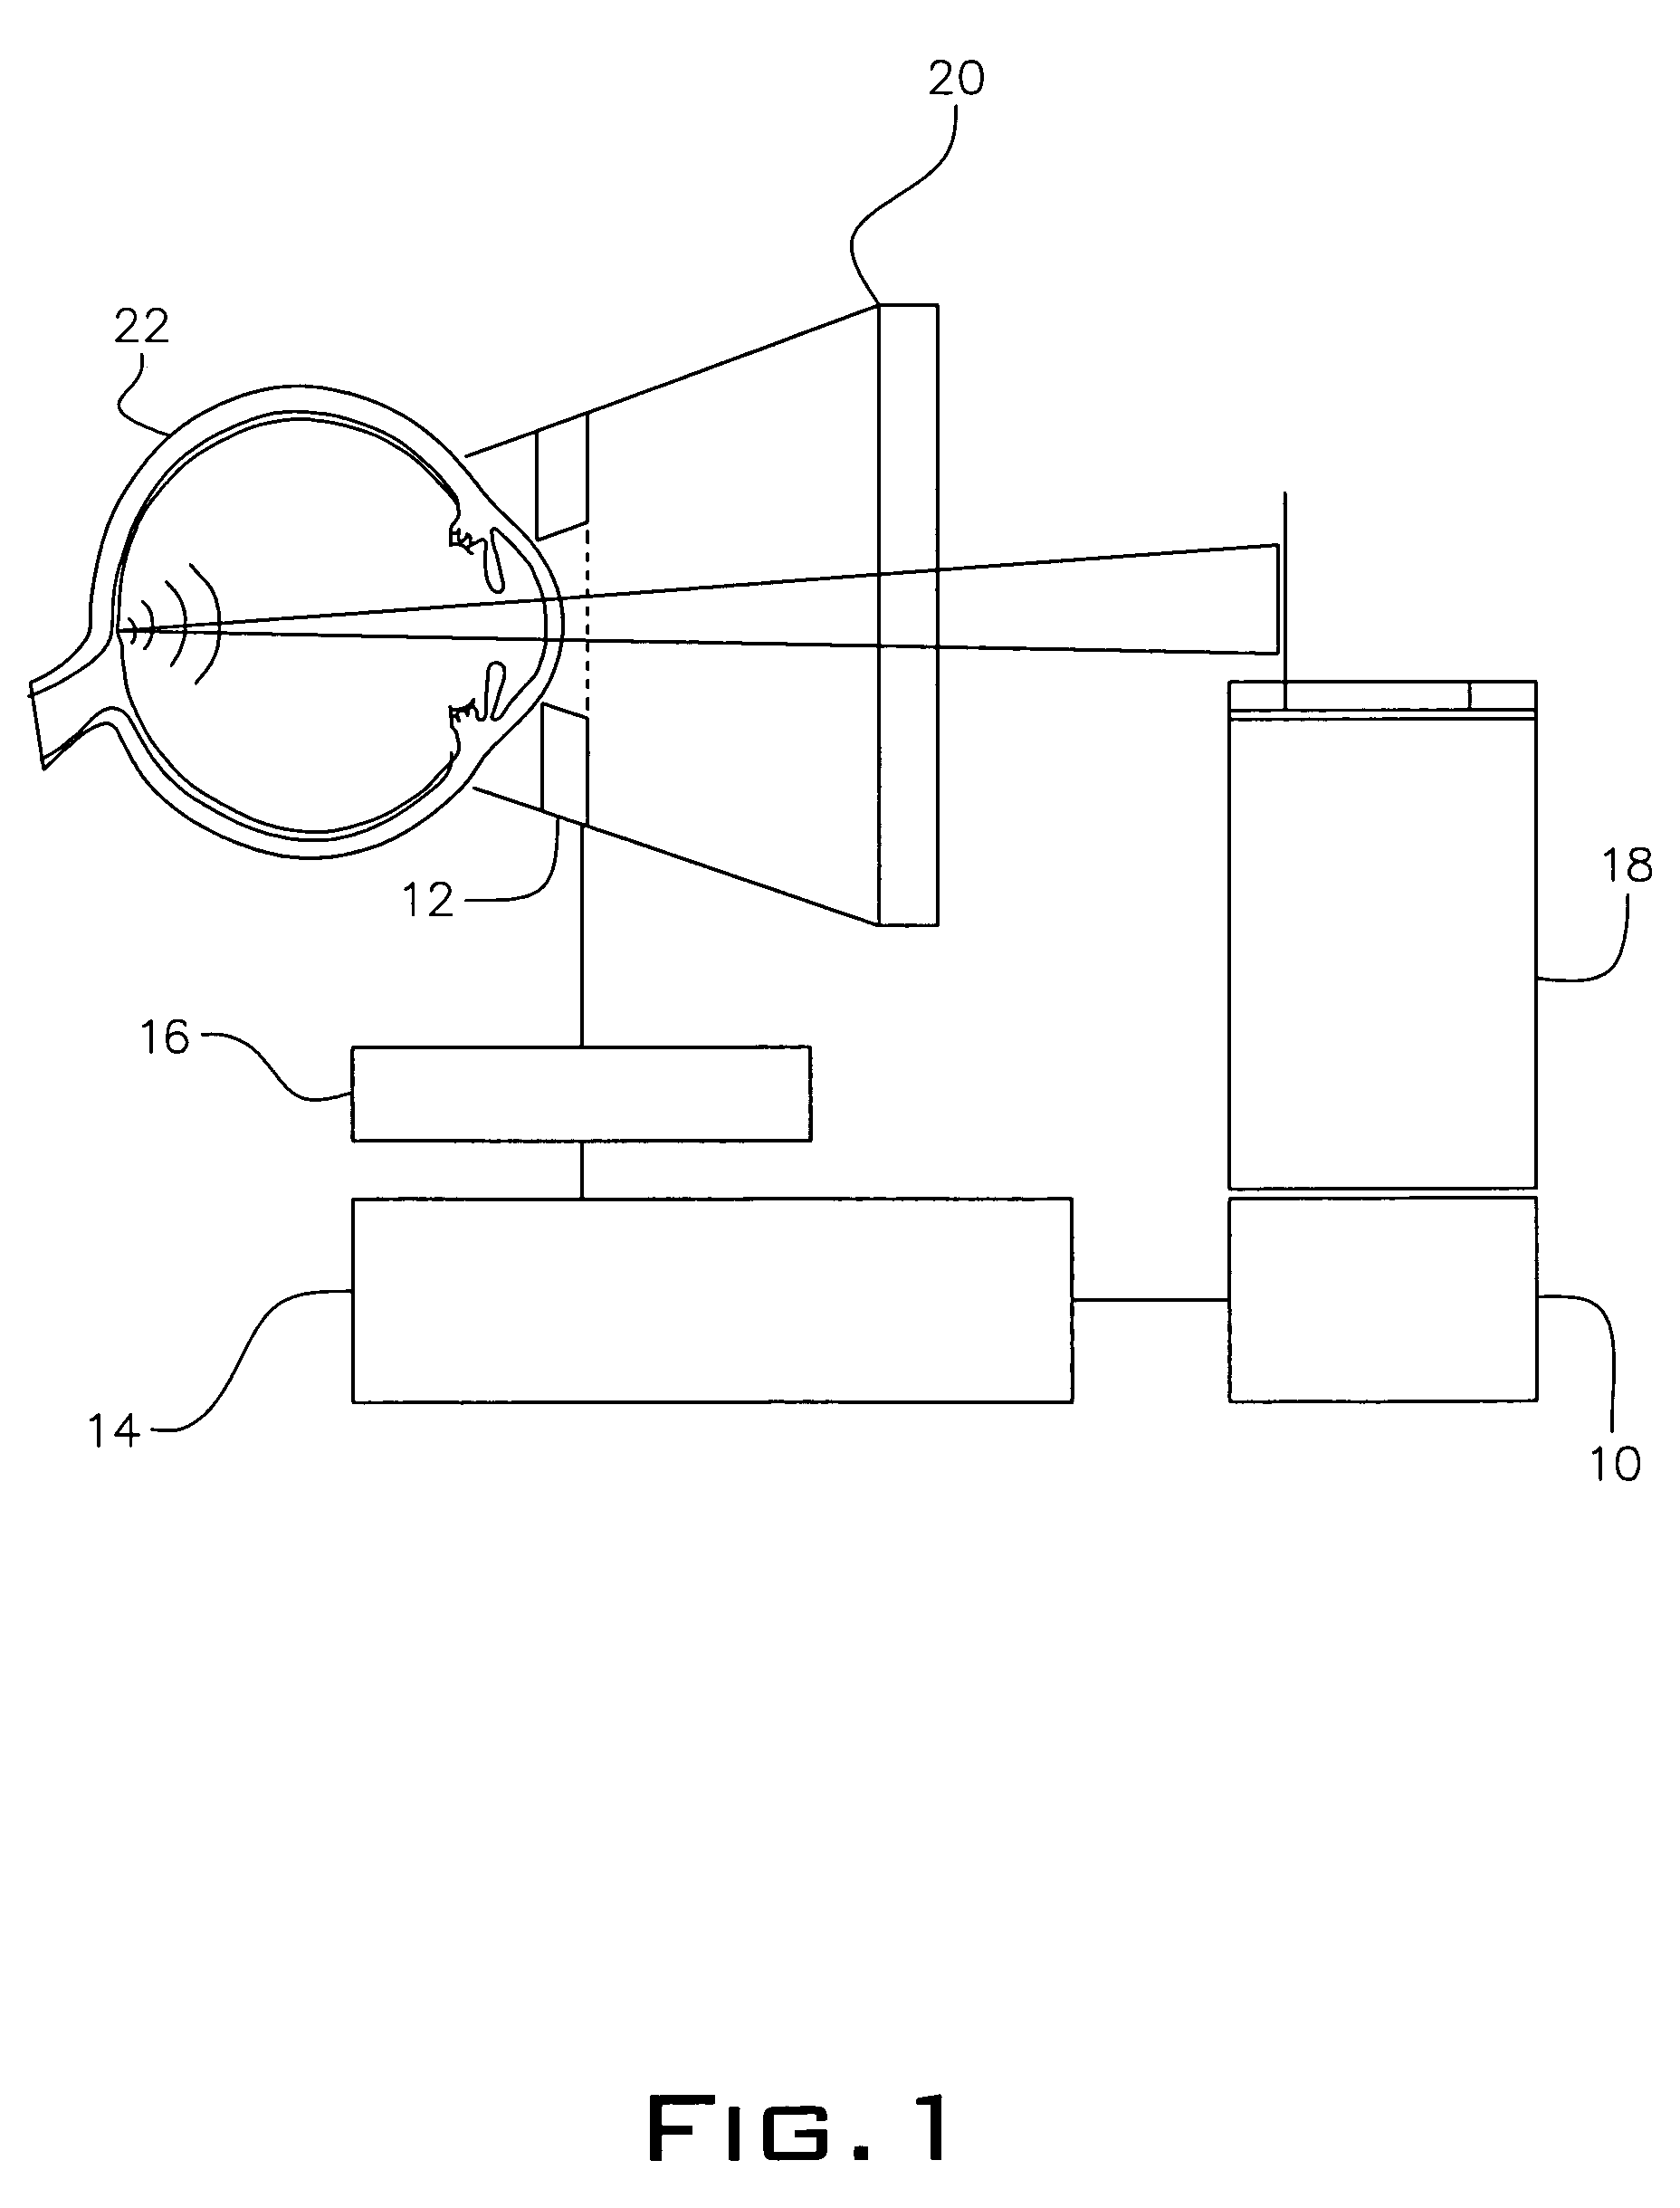 Phototherapy method for irradiating biological tissue with a series of laser pulse sequences